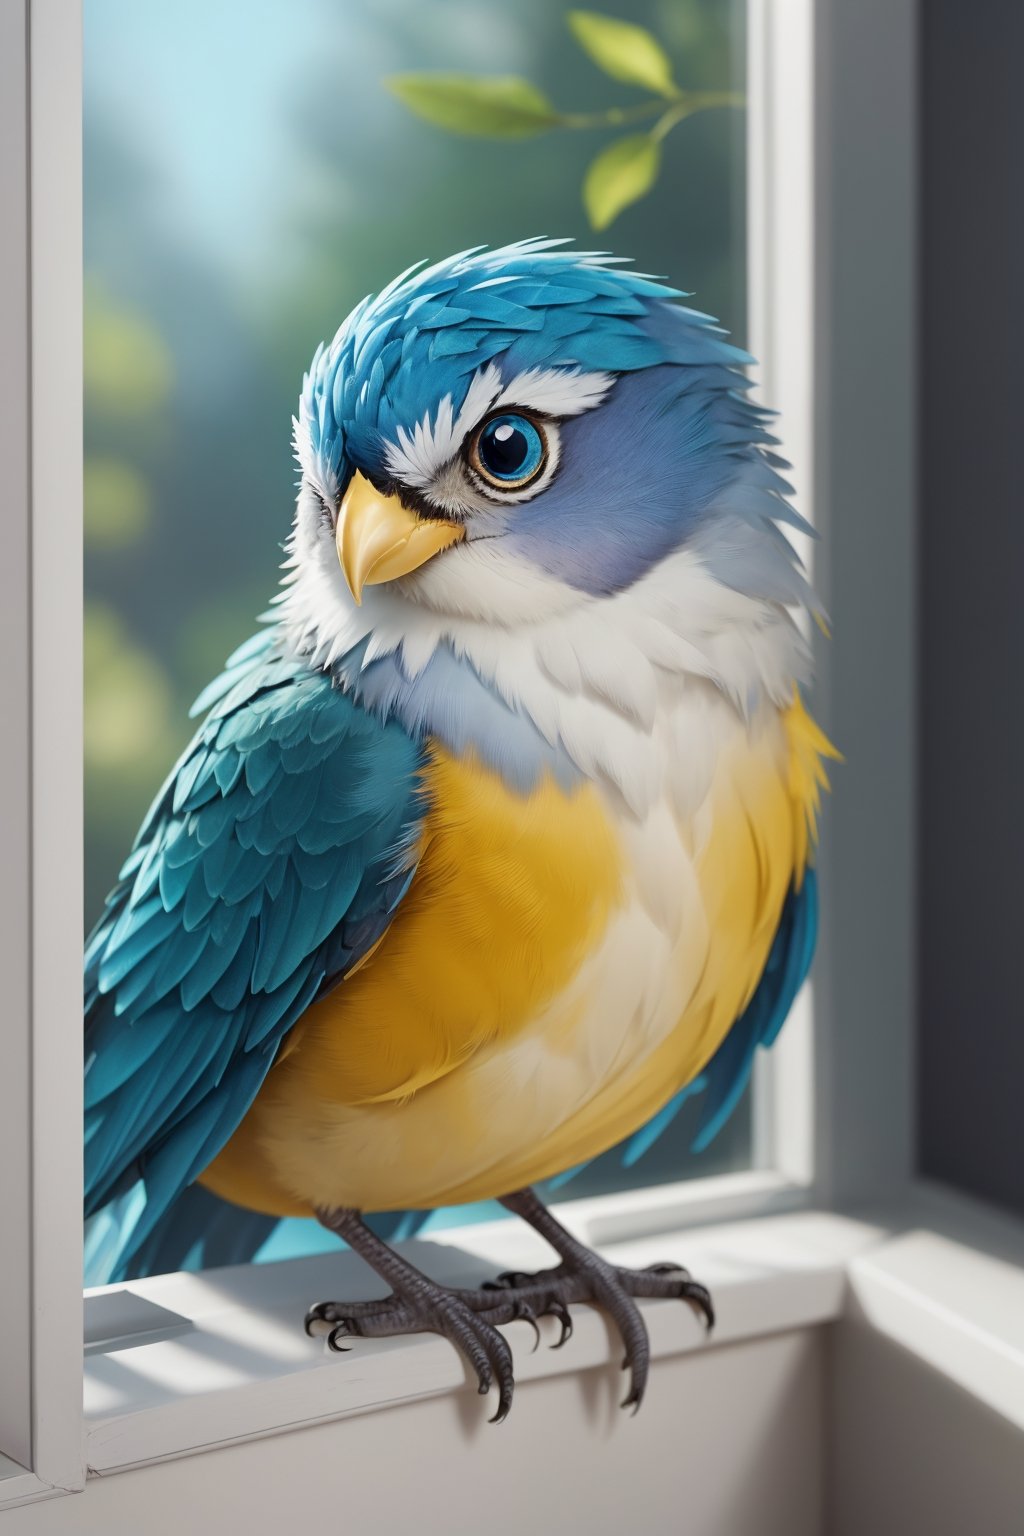 (best quality, hyper-realistic, 8K, ultra HD), (Pixar style, Disney style, Cinema 4D), Create a stunning 8K ultra HD illustration that brings Benny, a small bird with bright blue feathers and a melodious voice, to life. Render Benny in a hyper-realistic style, paying homage to both Pixar and Disney's iconic animation styles, using the power of Cinema 4D to capture every intricate detail of this charming character perched gracefully on a windowsill.